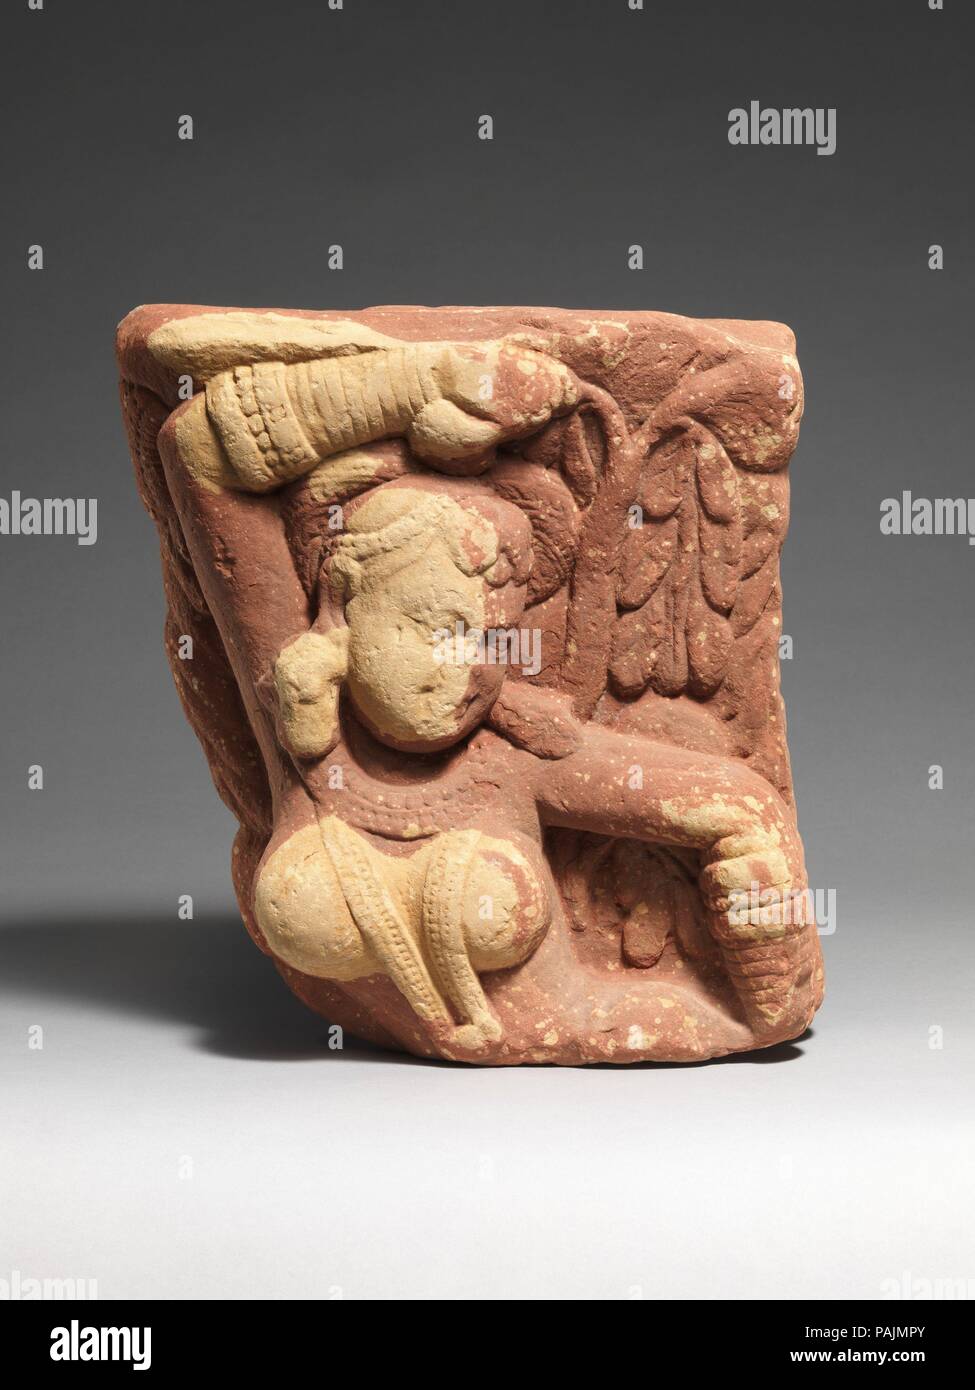 Tree Spirit Deity (Yakshi). Culture: India (Uttar Pradesh, Mathura region). Dimensions: H. 13 3/4 in. (34.9 cm); W. 12 1/2 in. (31.8 cm); D. 5 in. (12.7 cm). Date: 1st-2nd century.  This double-sided bracket (vrksadevata) for a gateway (torana) is decorated on either side with a tree-spirit deity known as a yakshi, who holds a flowering tree as a symbol of her fecundity. Her pose is that of salabhanjika ('breaking a branch of the sala tree'): grasping a branch, she thus engages with the fertility of the earth, bringing the tree into flower. Such figures provided an auspicious presence at the e Stock Photo